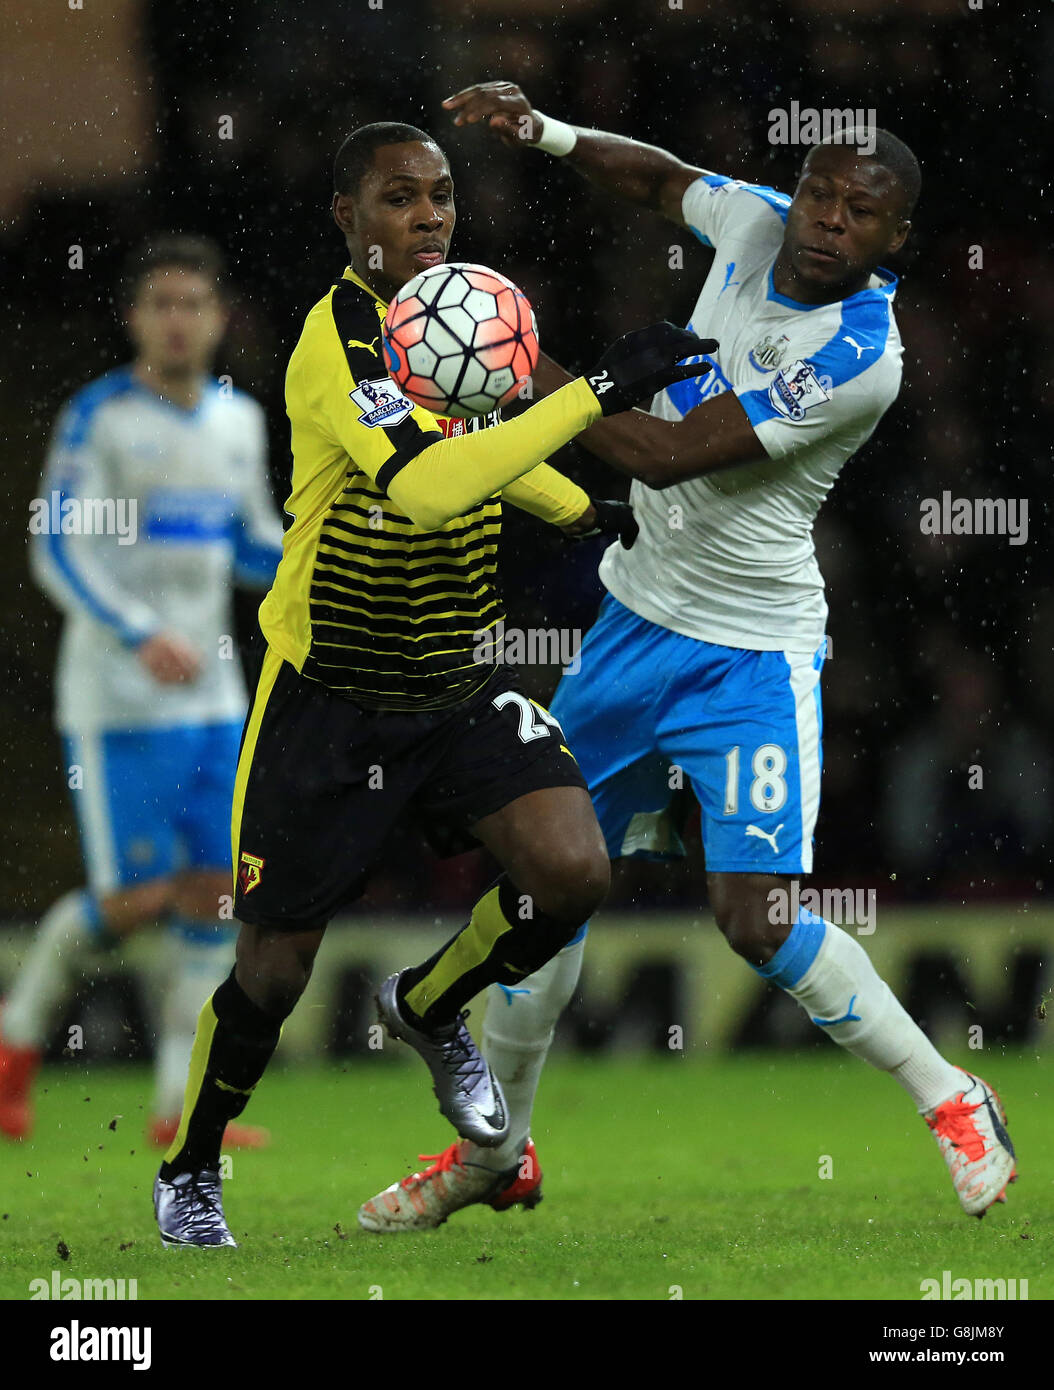 Watford's Odion Ighalo (left) and Newcastle United's Chancel Mbemba battle for the ball during the Emirates FA Cup, third round game at Vicarage Road, Watford. Stock Photo